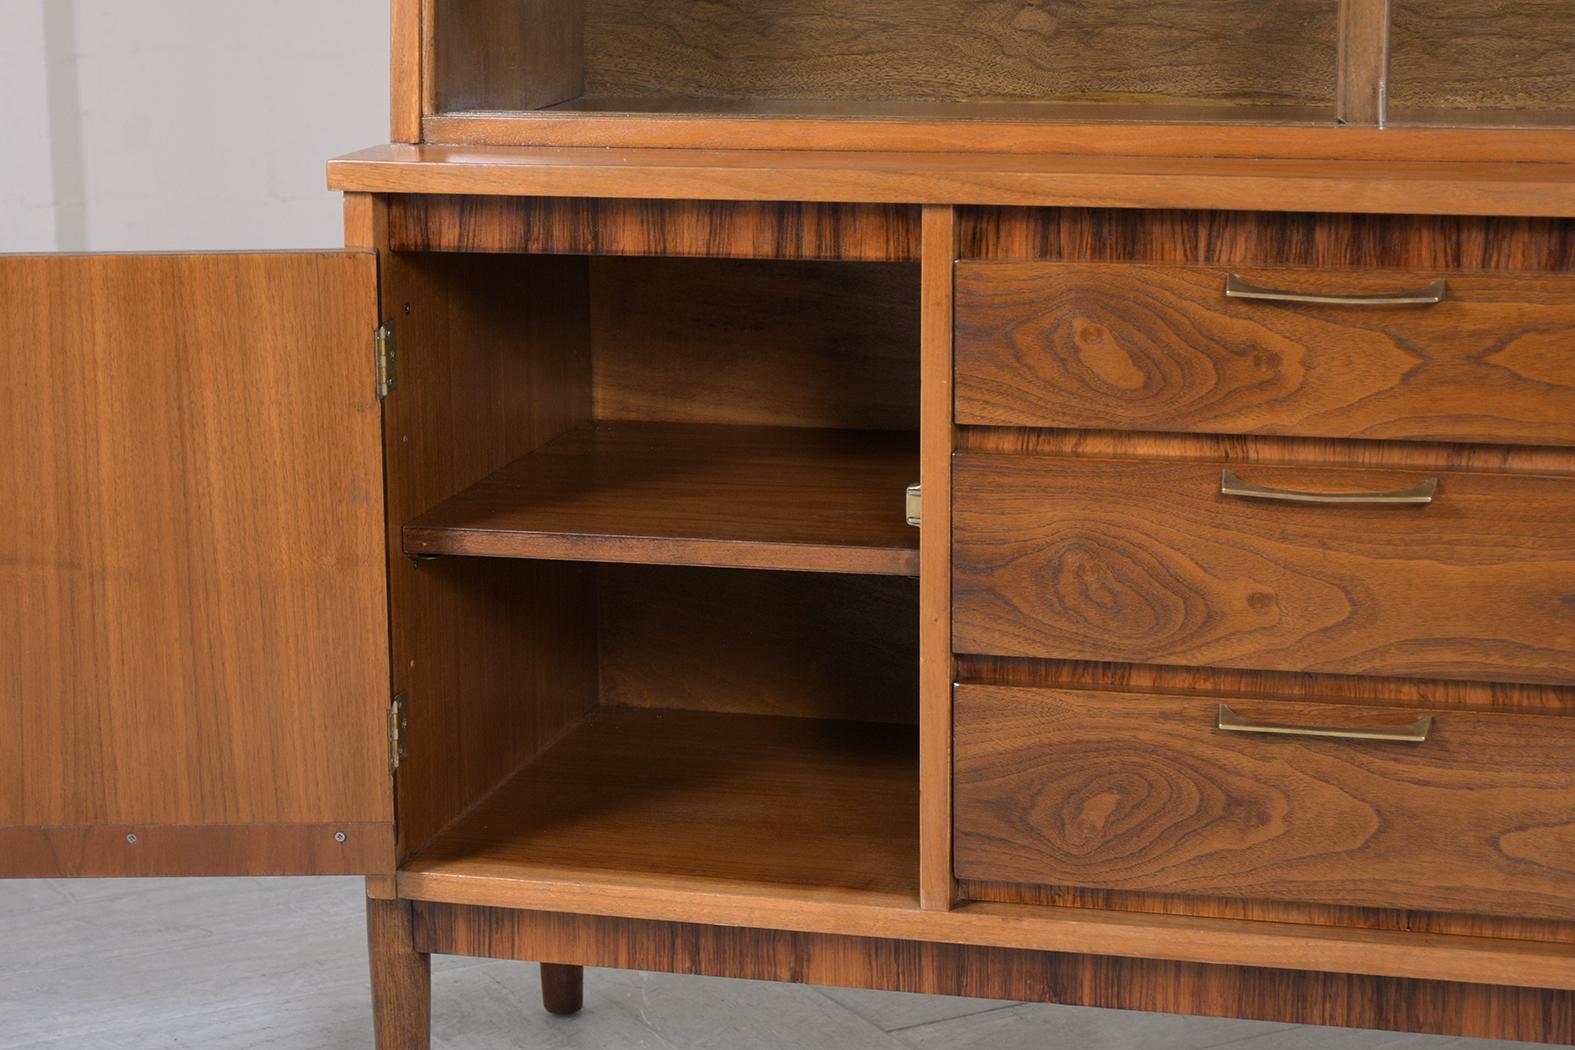 Lacquer 1960 Mid-Century Modern Walnut Sideboard with Rosewood Veneers and Glass Display